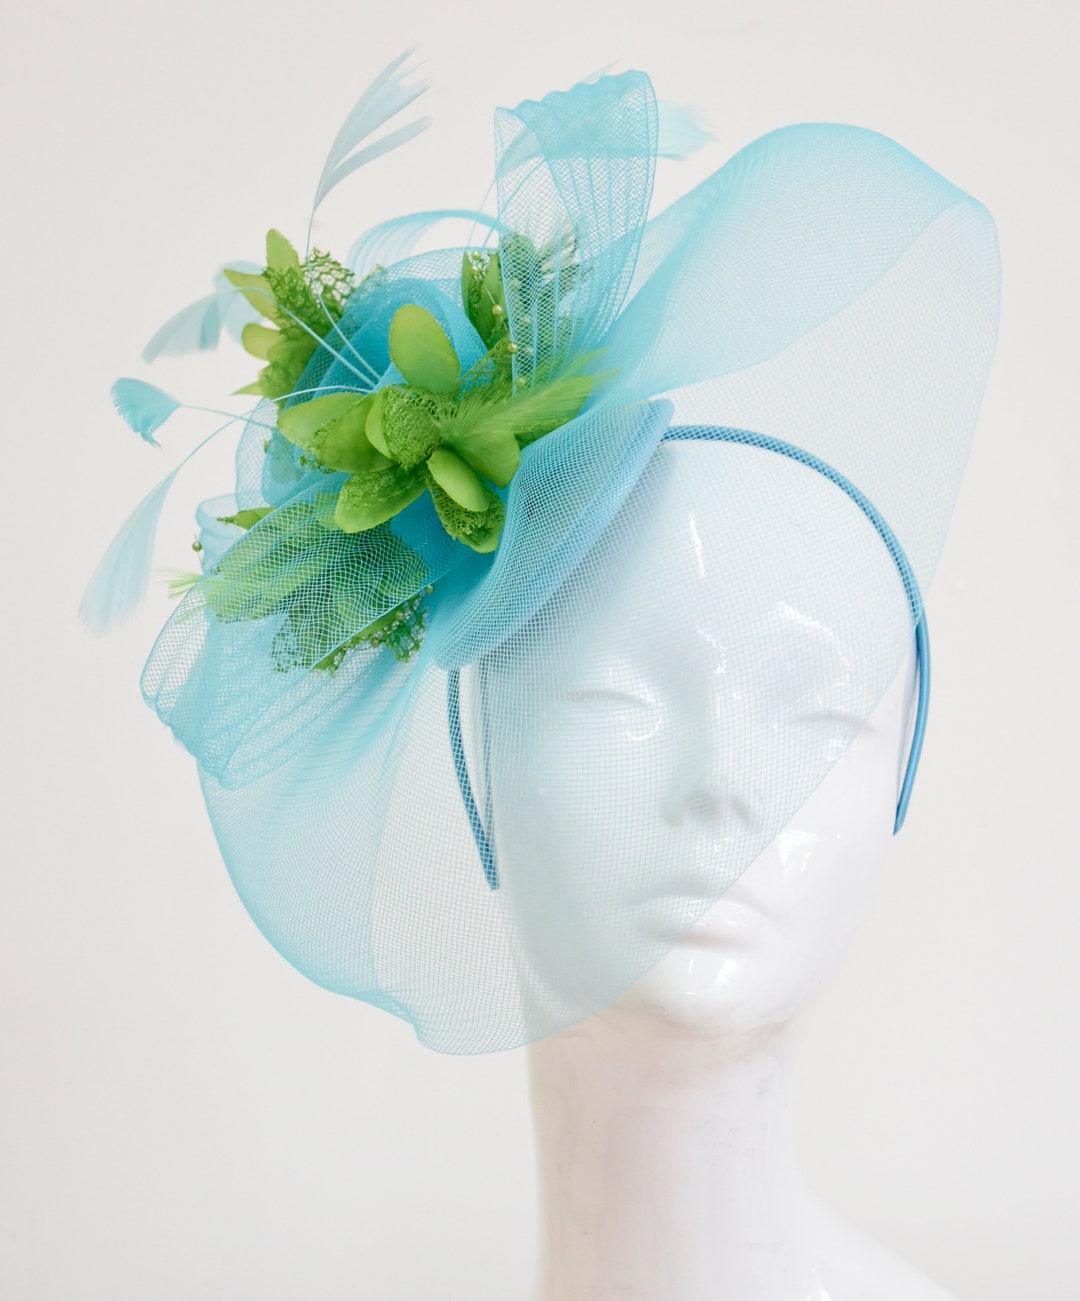 Big Light Turquoise Blue and Lime Green Fascinator Hat Veil Net Hair ...